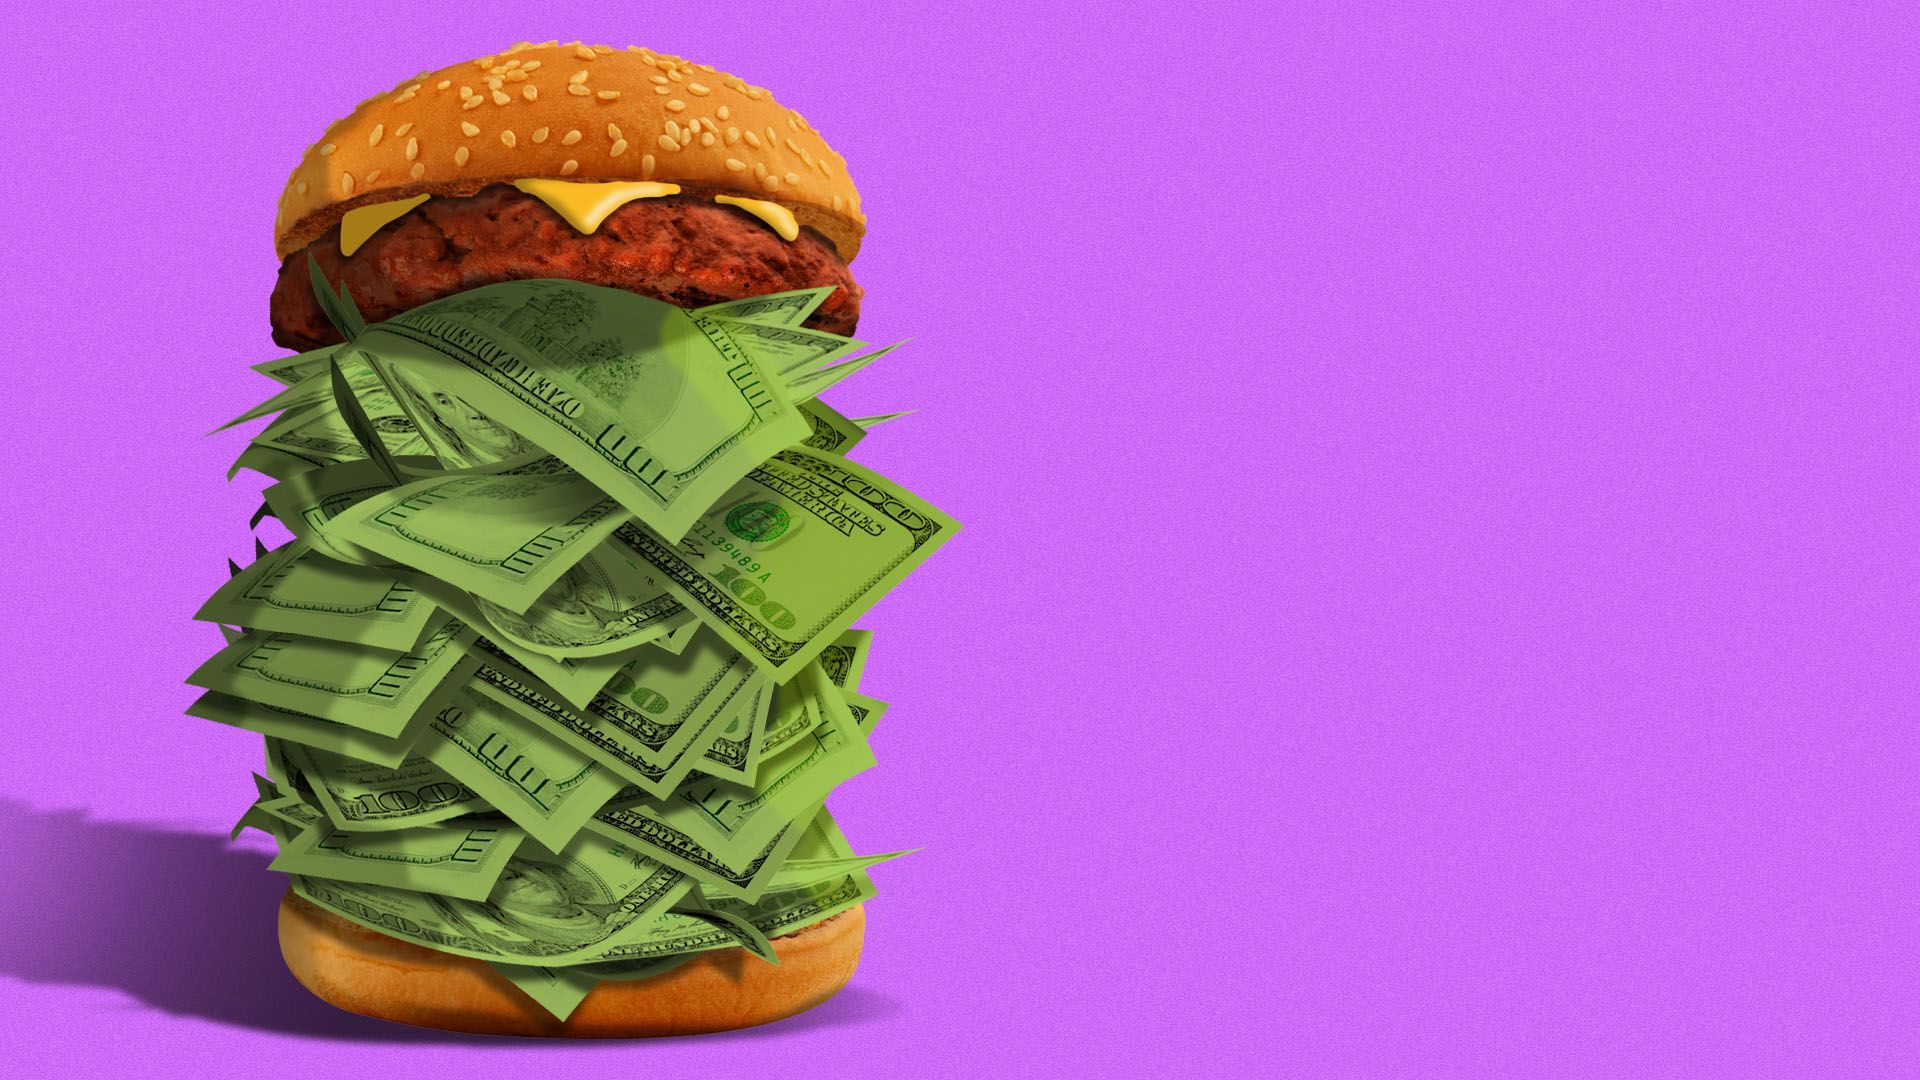 Illustration of a burger stacked high with money